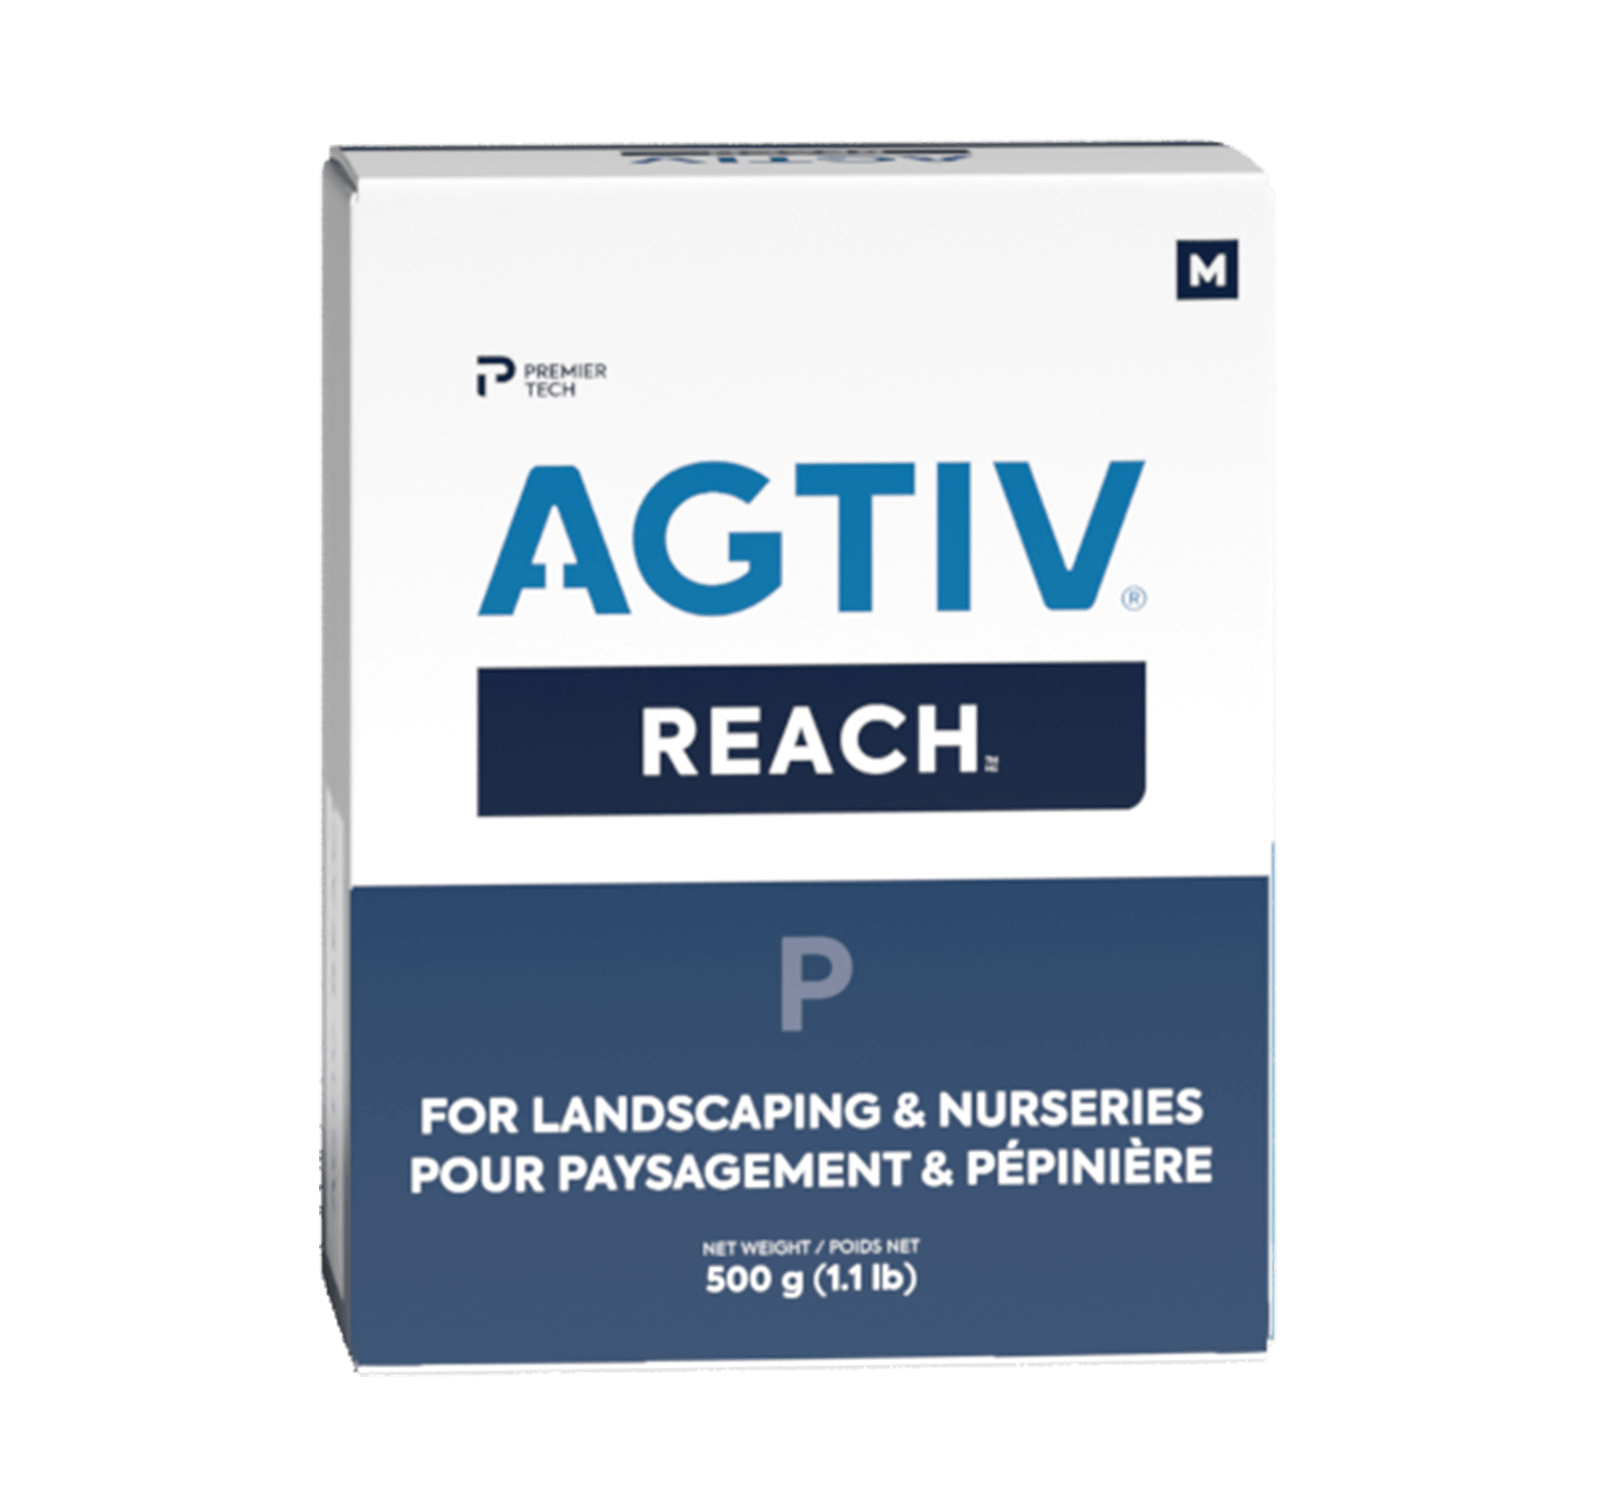 AGTIV REACH P for Landscaping & Nurseries